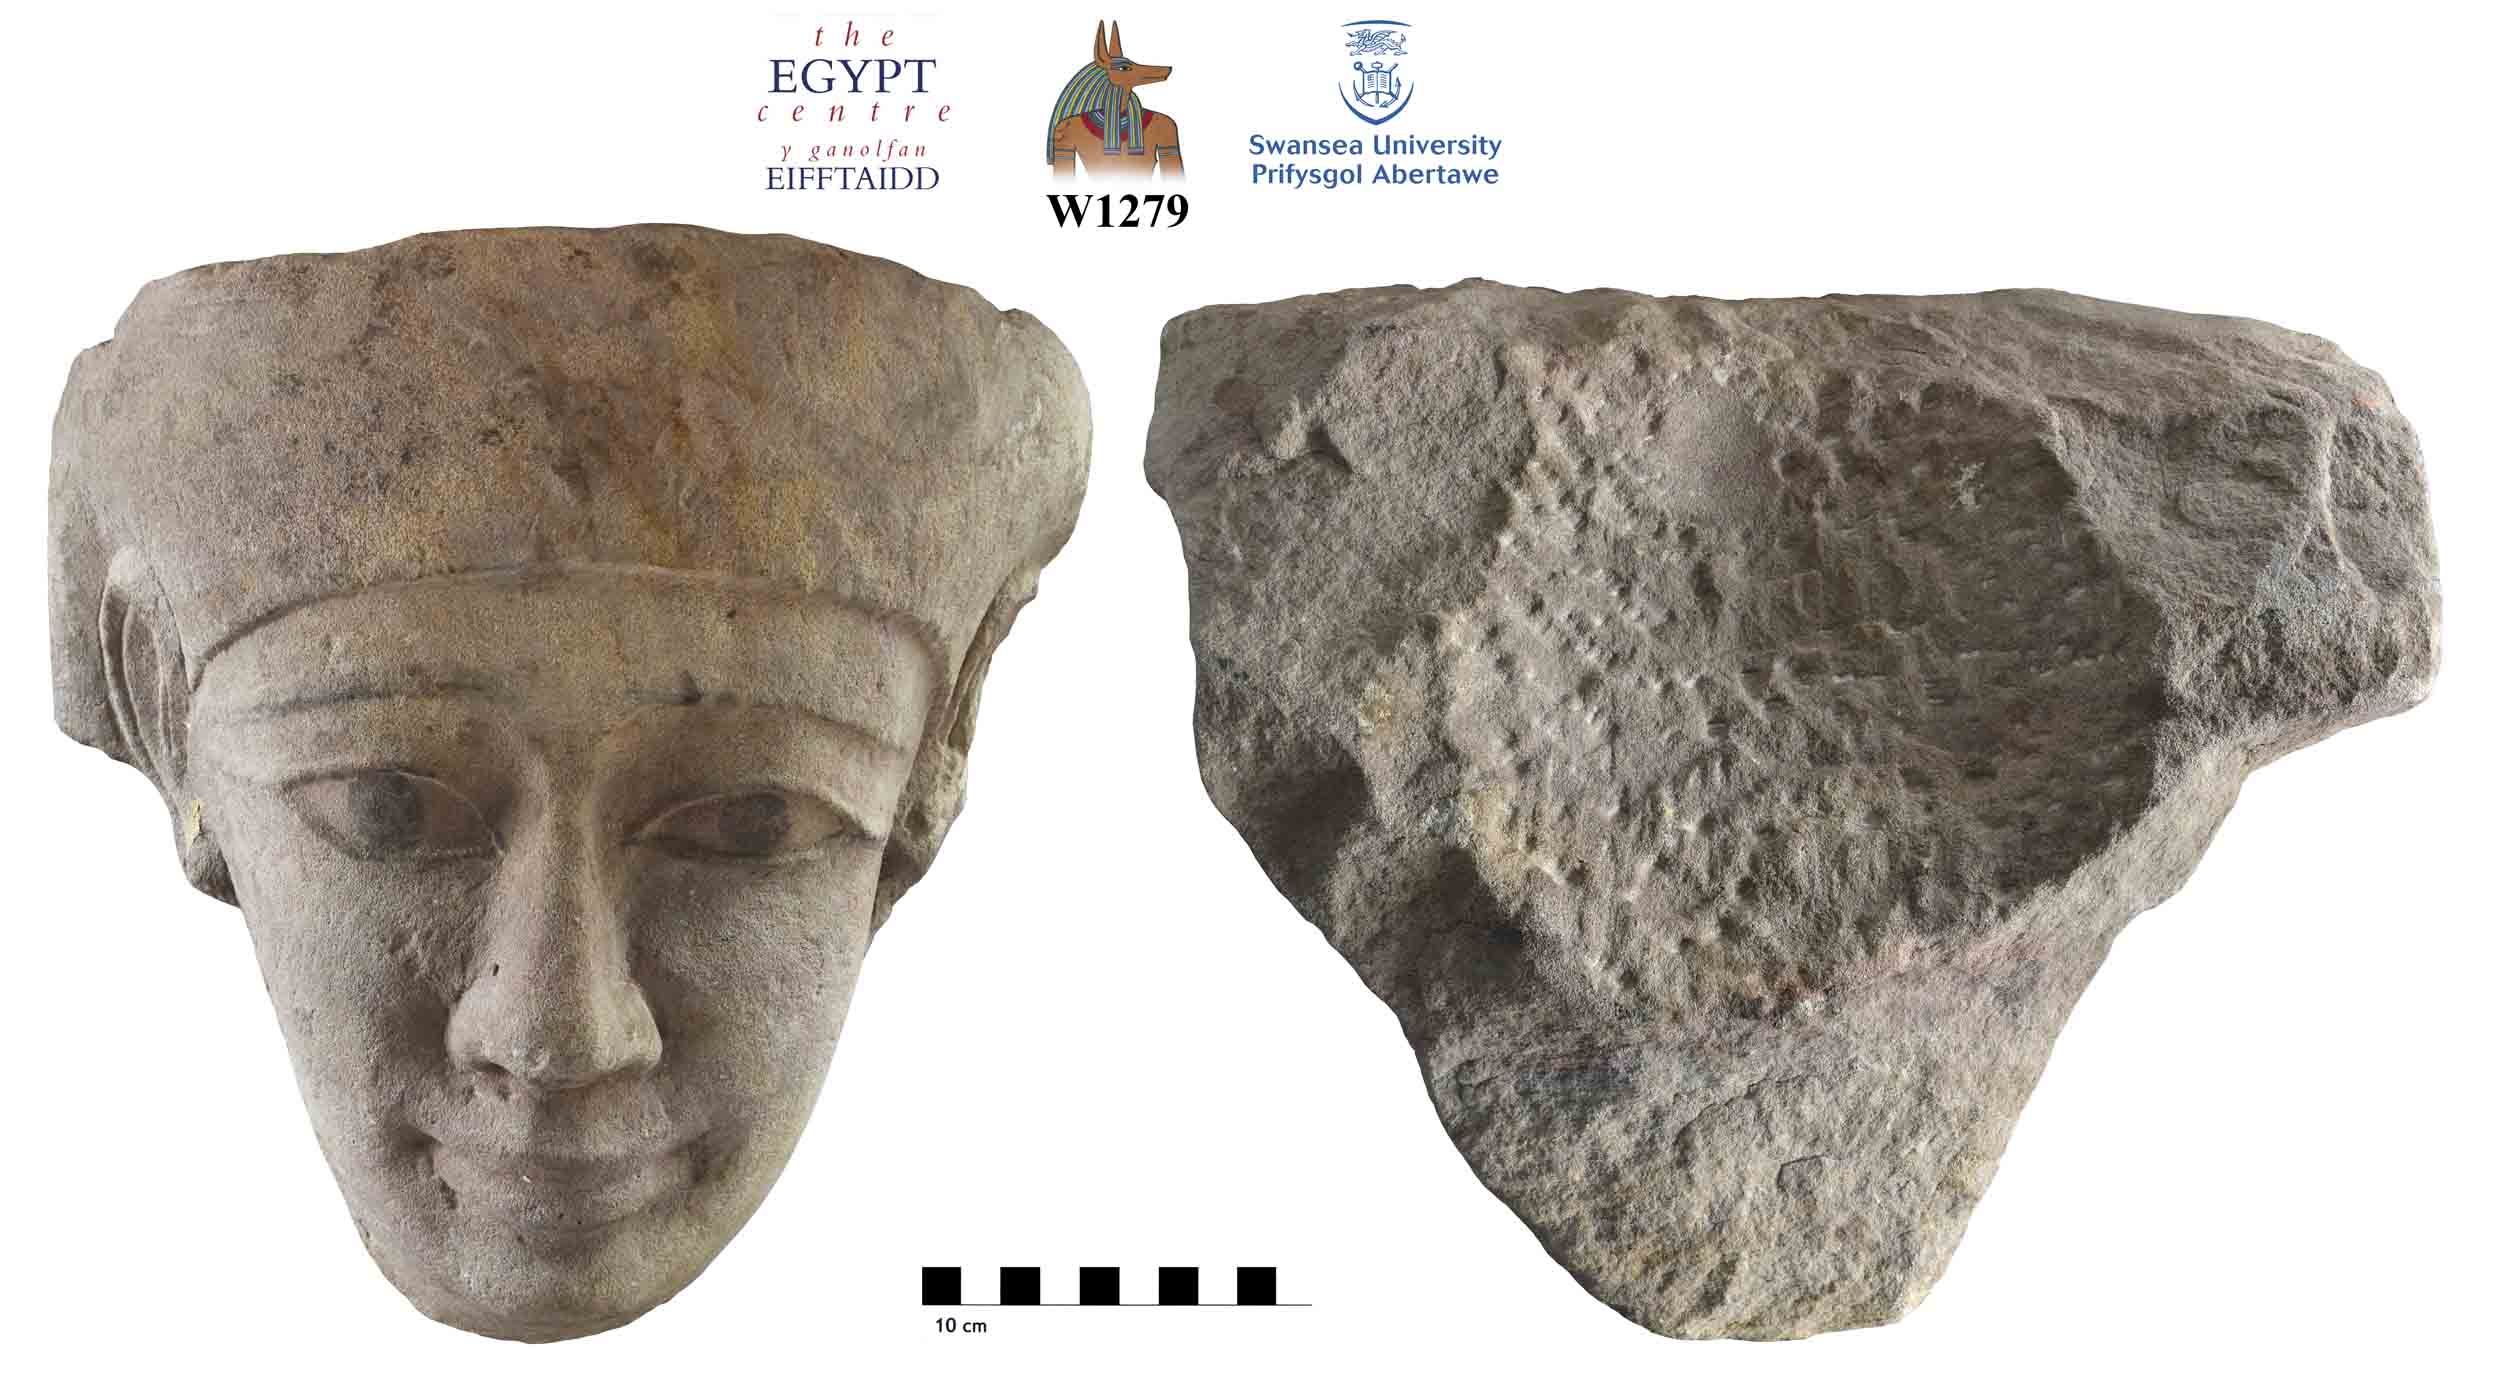 Image for: Fragment of the head of a sarcophagus